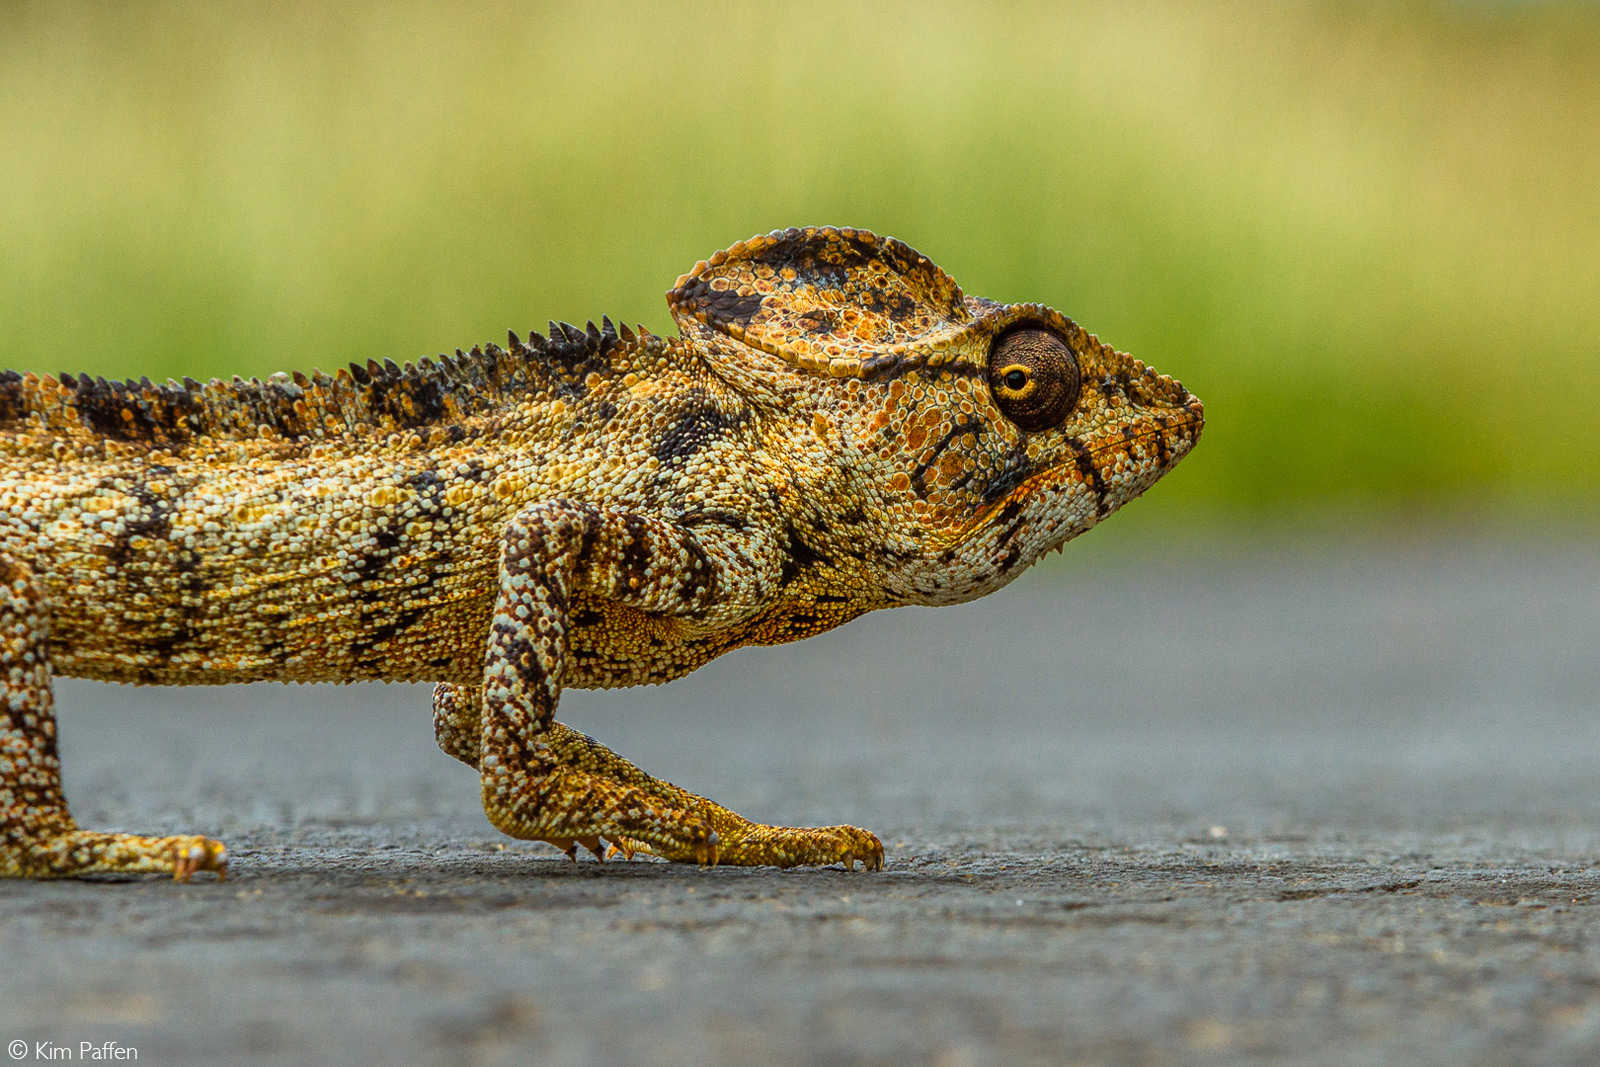 A Malagasy giant chameleon crossing the street on a road along the Bay of Diego-Suarez in Madagascar © Kim Paffen